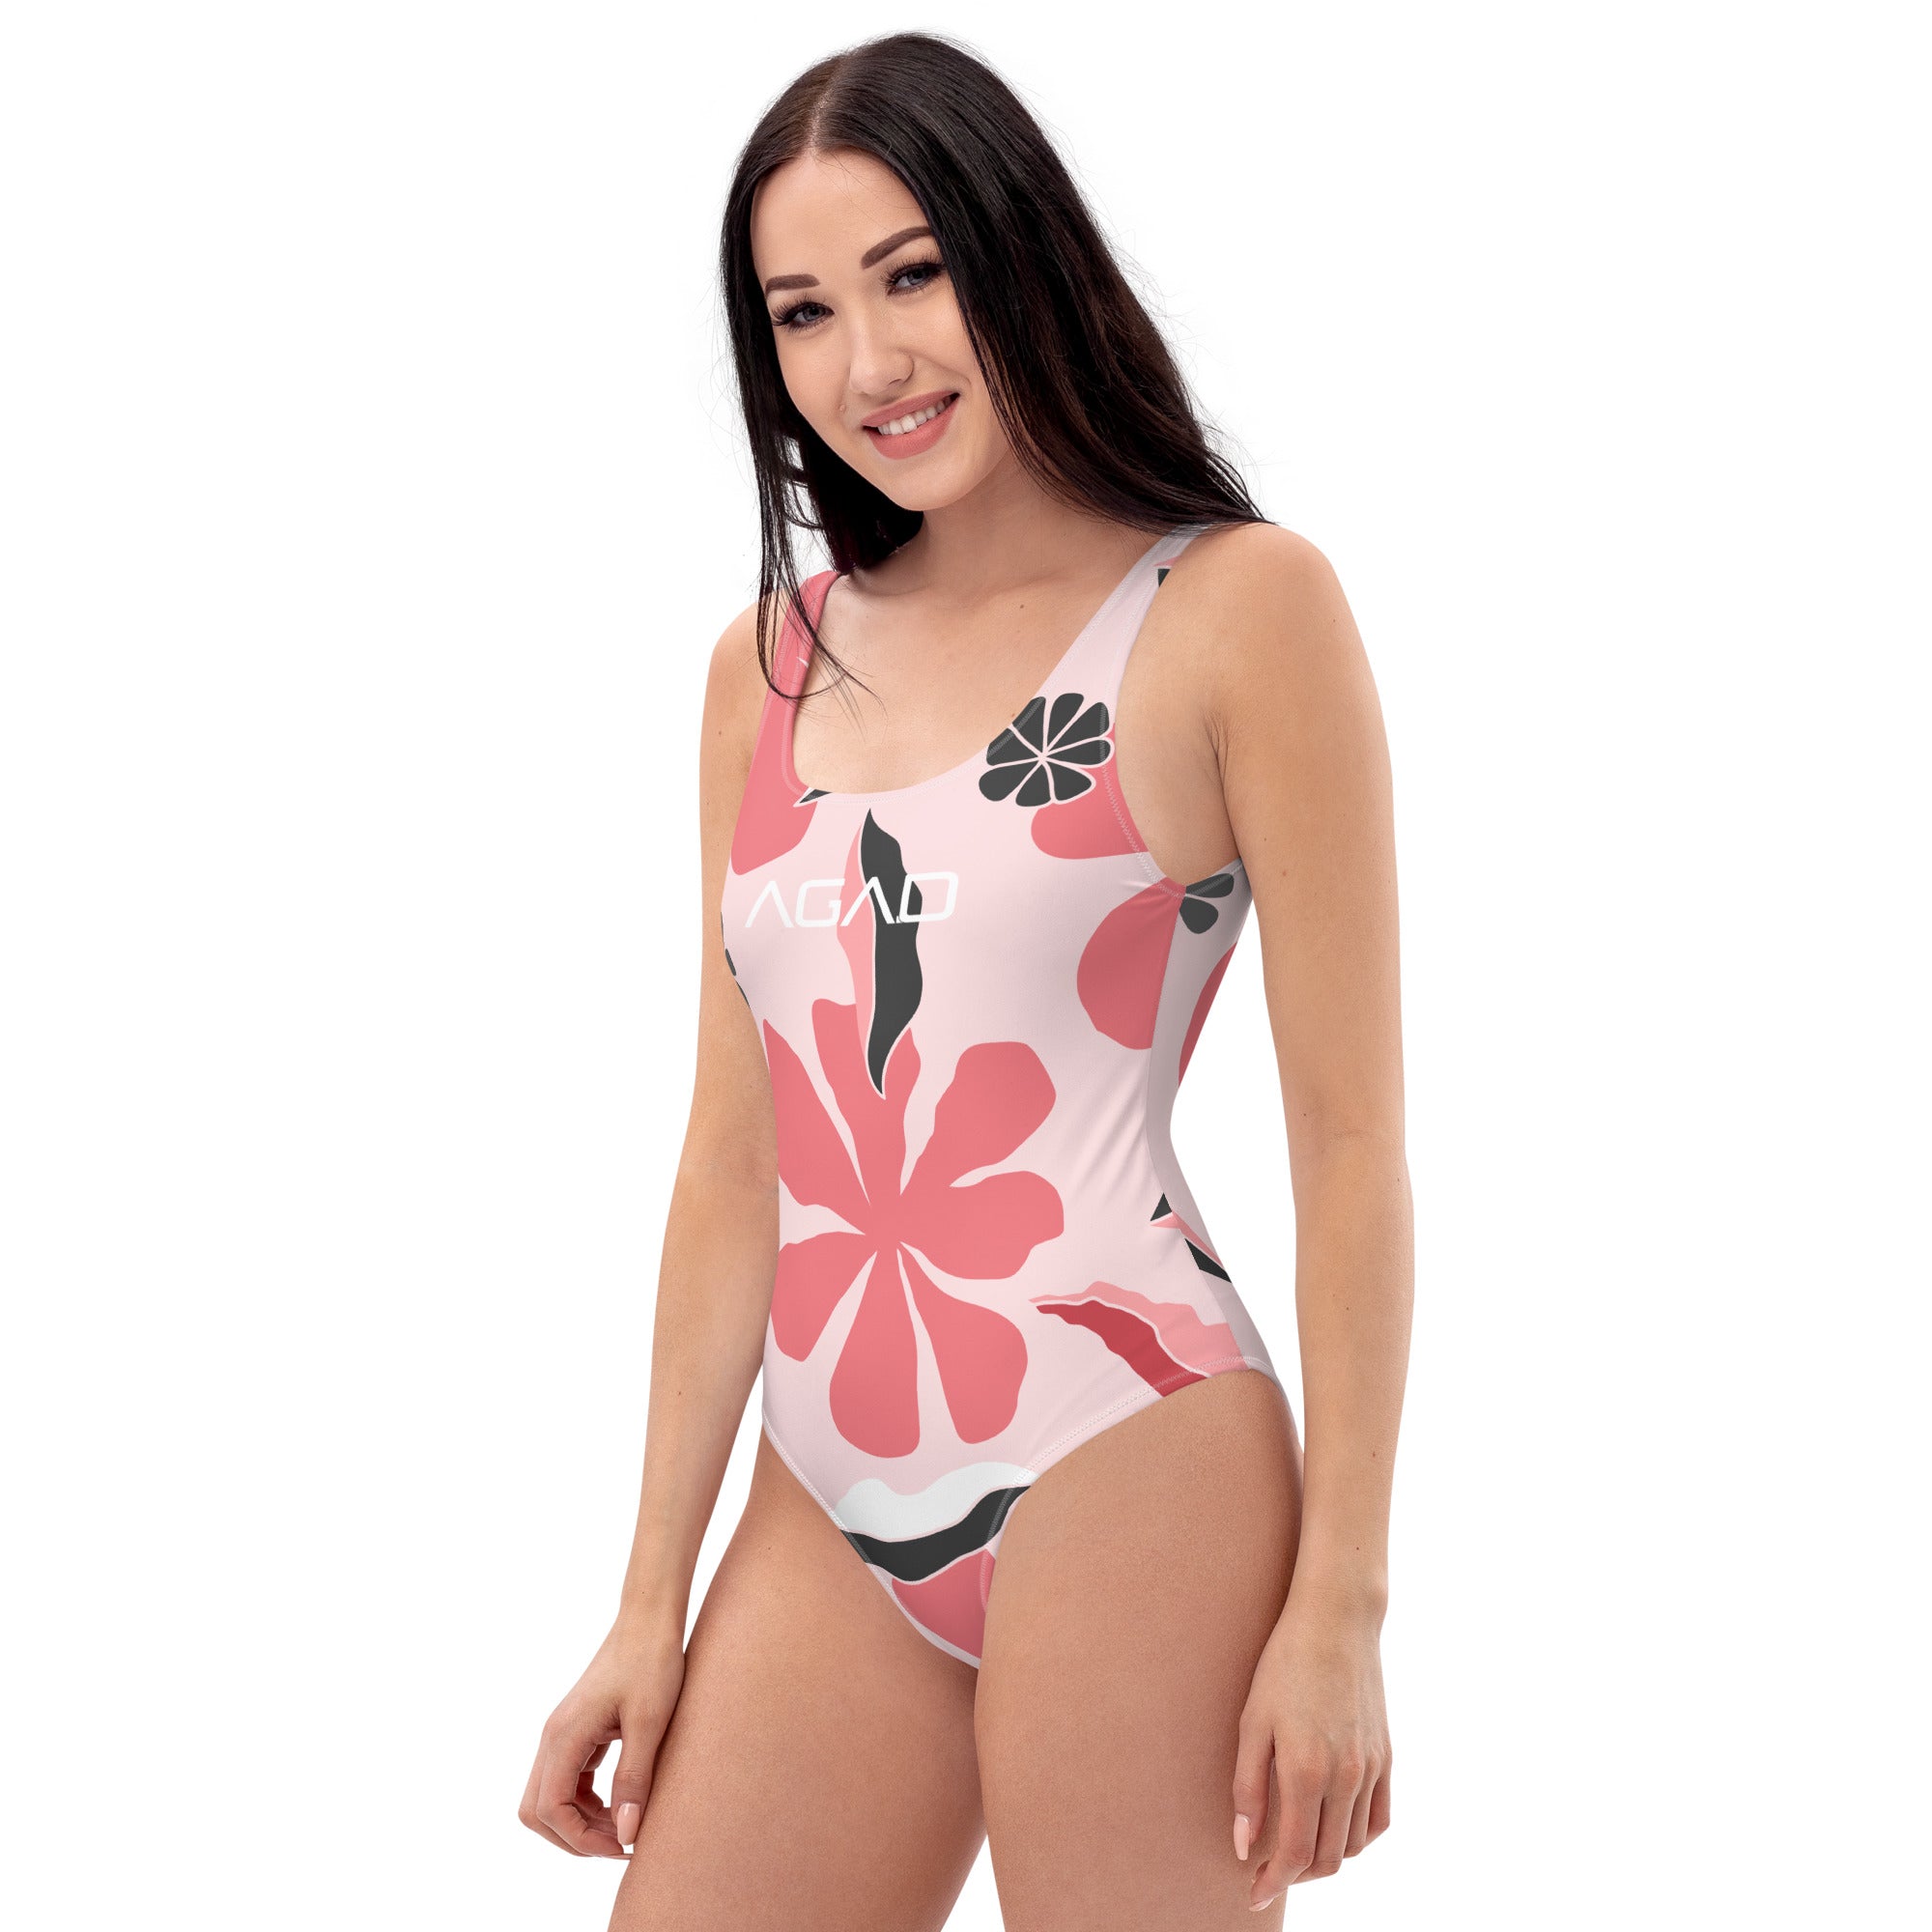 AGAD Summer 24 (Lily) One-Piece Swimsuit